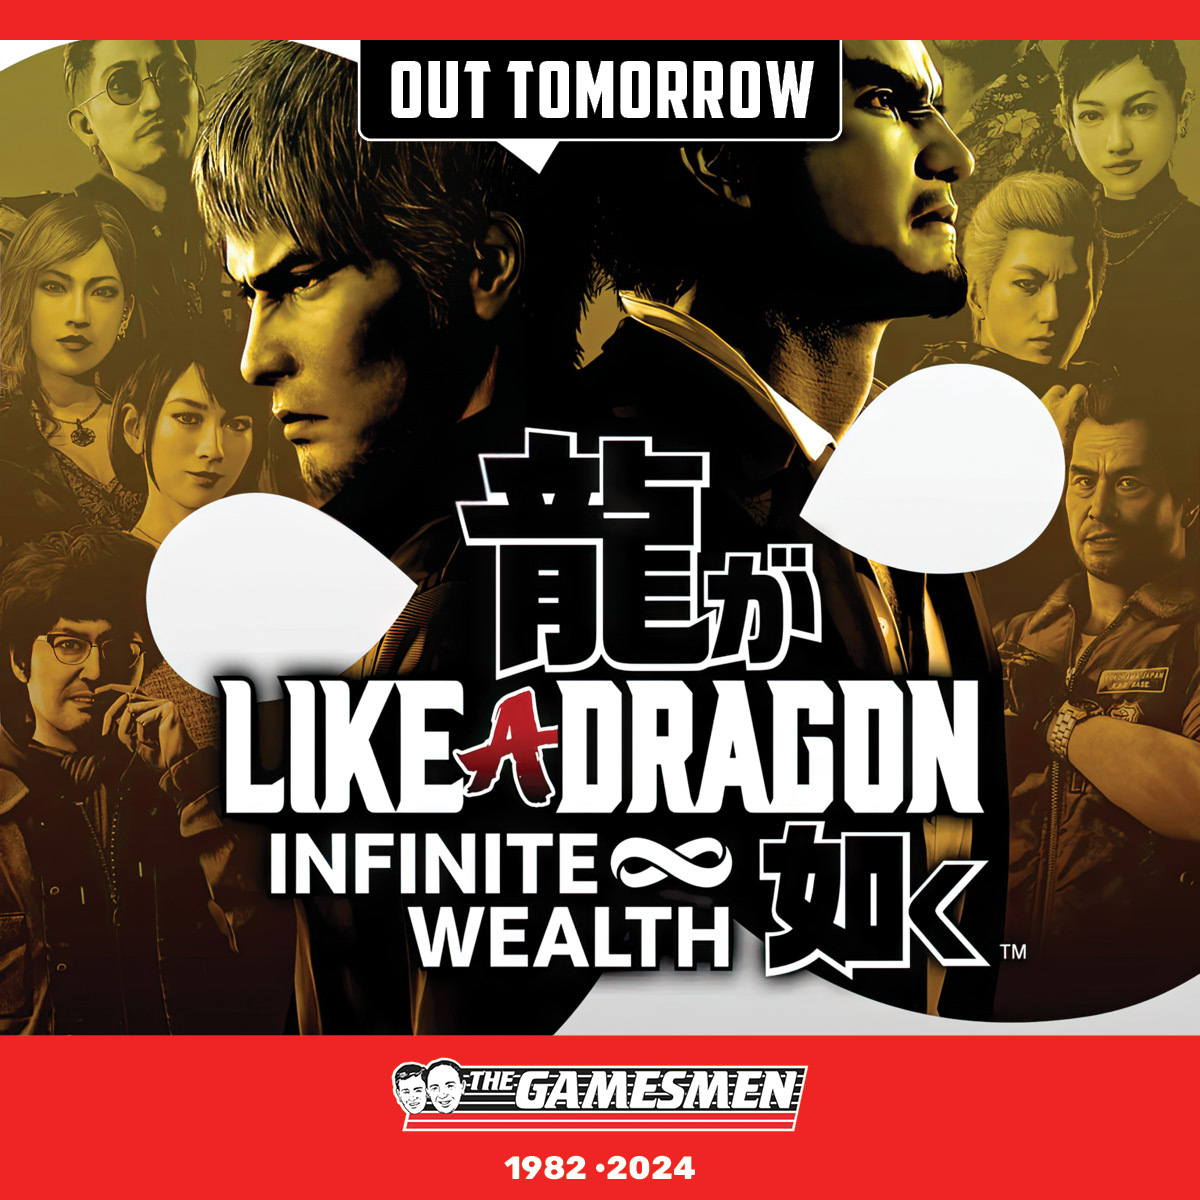 The Gamesmen on X: Infinite Wealth, Infinite Adventure! Experience the  next RPG inspired adventure in the Like A Dragon series with Ichiban Kasuga  and Kazuma Kiryu, and discover the dramatic quests and